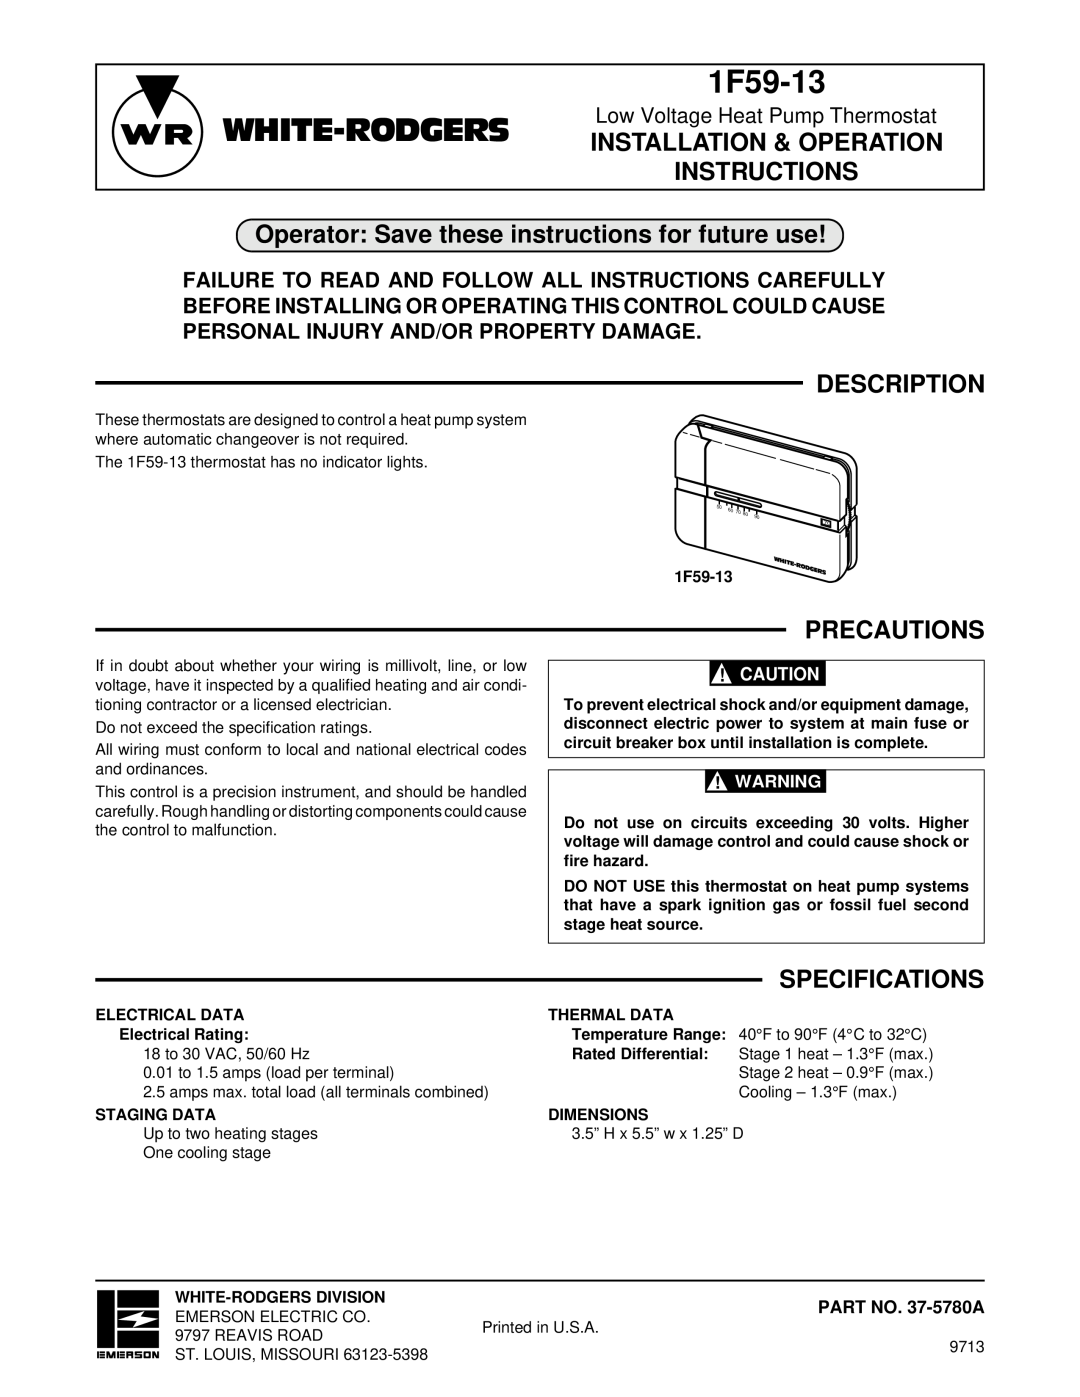 White Rodgers 1F59-13 specifications Operator Save these instructions for future use, Description, Precautions, Dimensions 